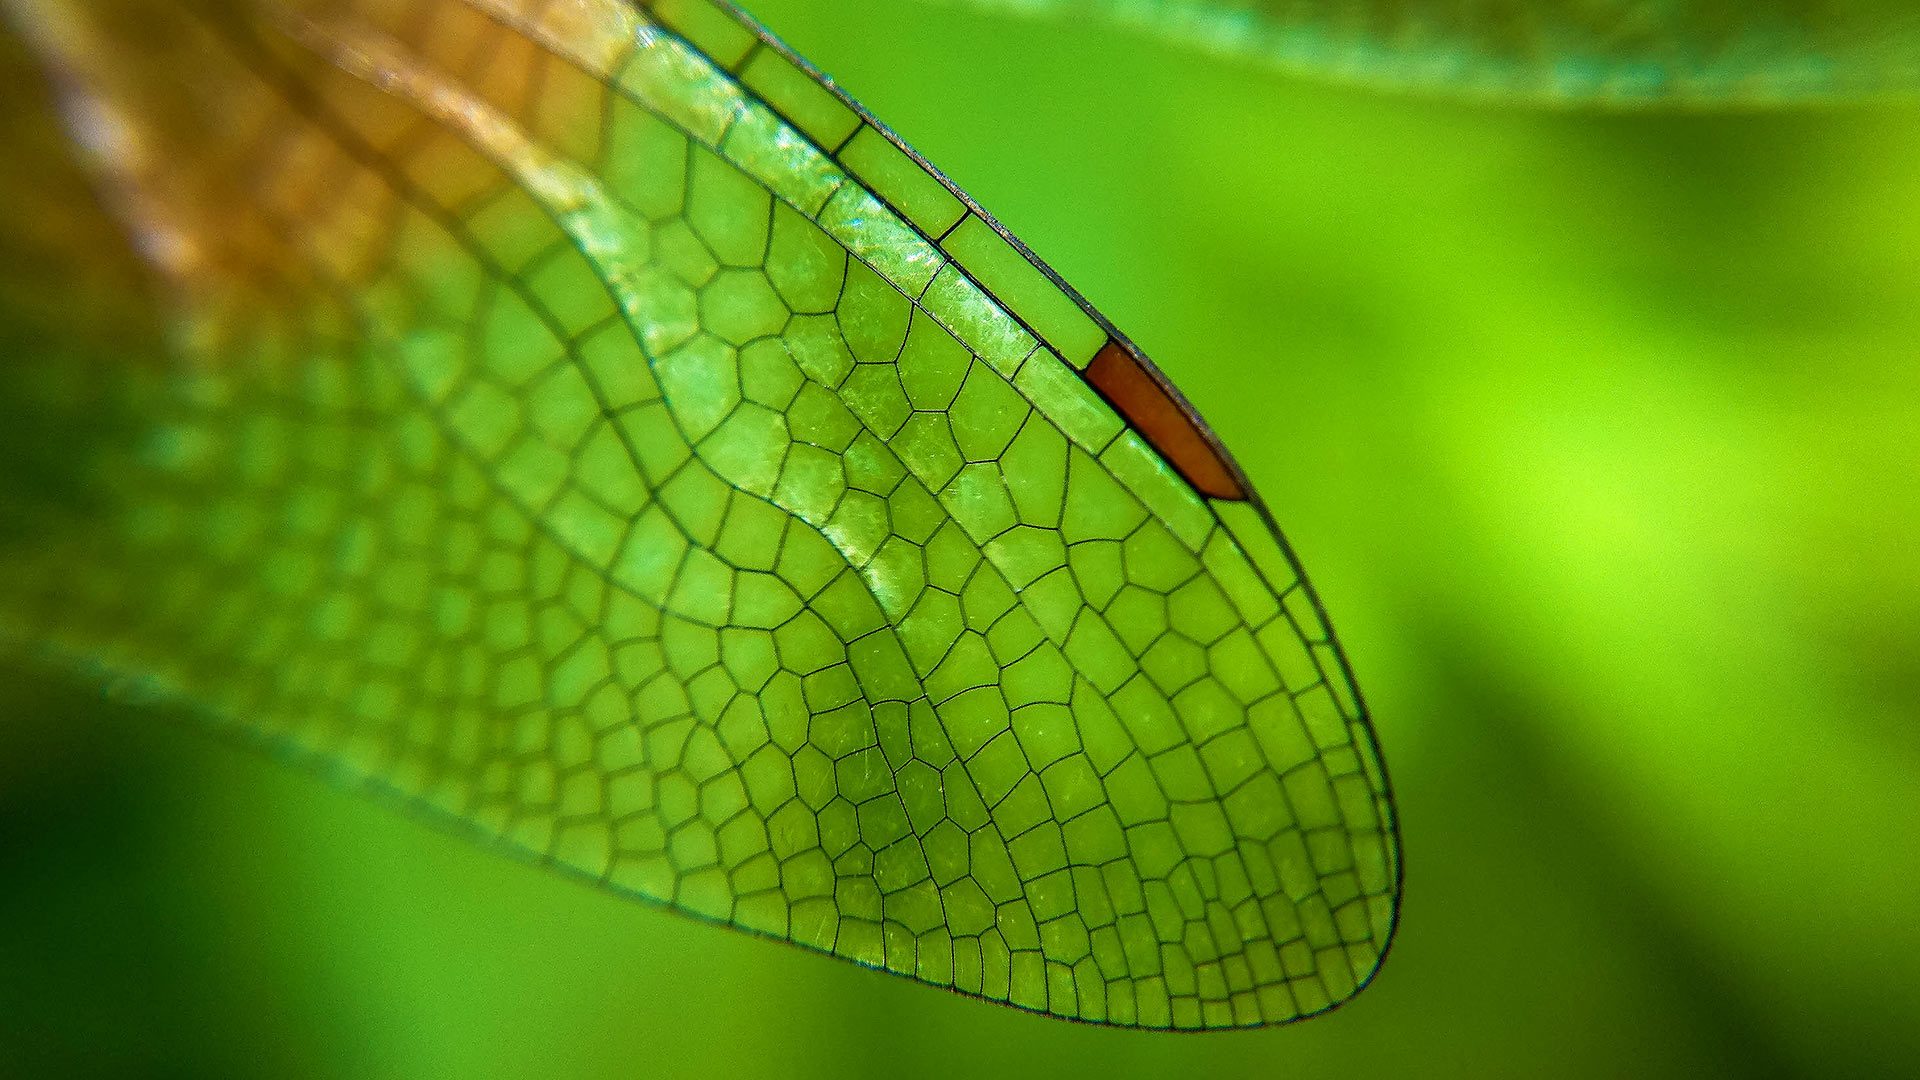 Close Up Of A Dragonfly Wing C Azwar Thaufeeq 500px Getty Images Bing Everyday Wallpaper 2019 10 13